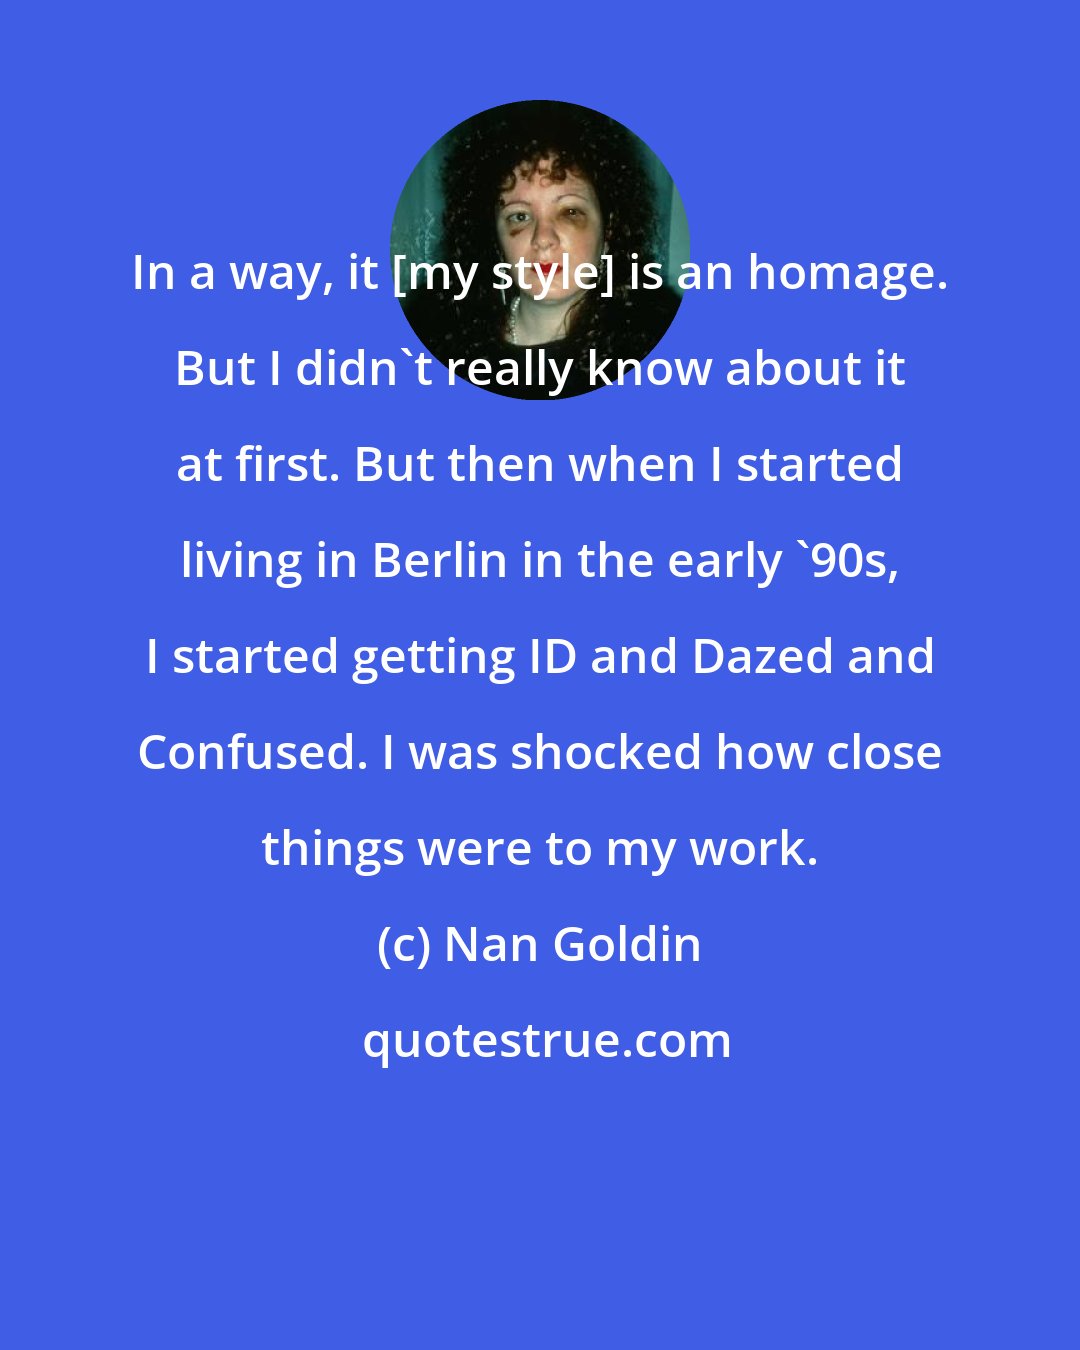 Nan Goldin: In a way, it [my style] is an homage. But I didn't really know about it at first. But then when I started living in Berlin in the early '90s, I started getting ID and Dazed and Confused. I was shocked how close things were to my work.